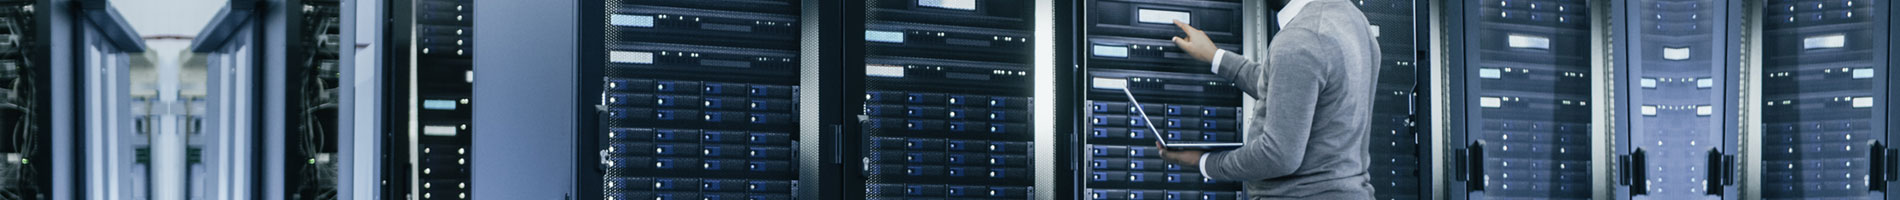 Managed Services banner image